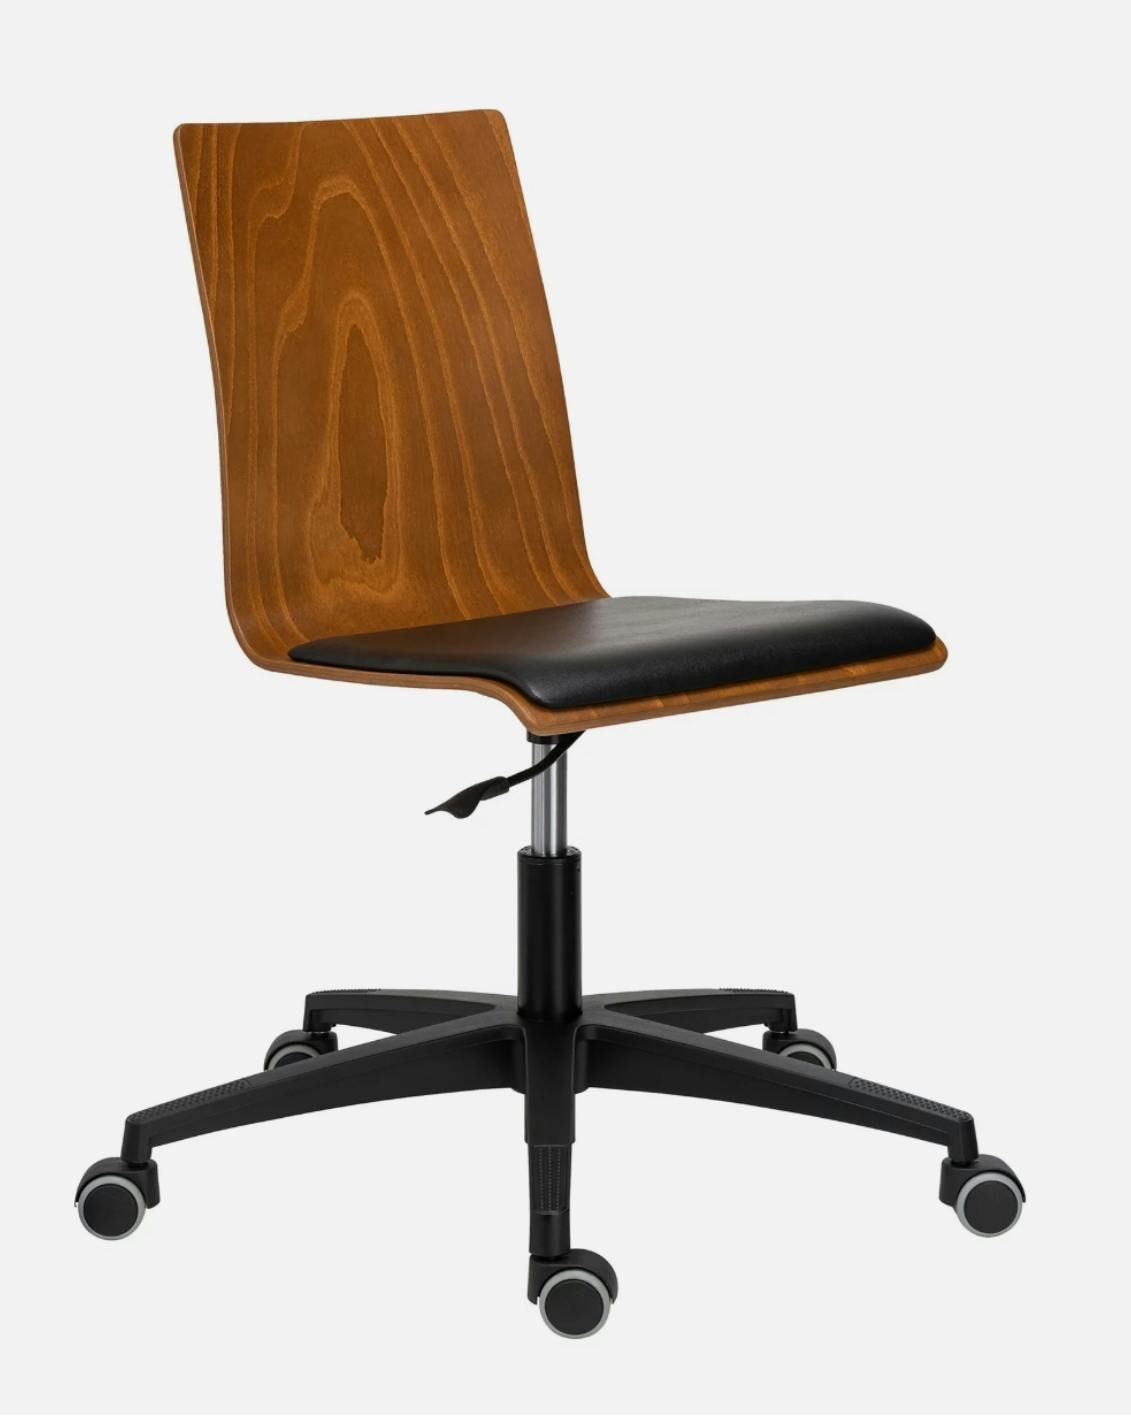 REL011 Wooden cushioned swivel office chair